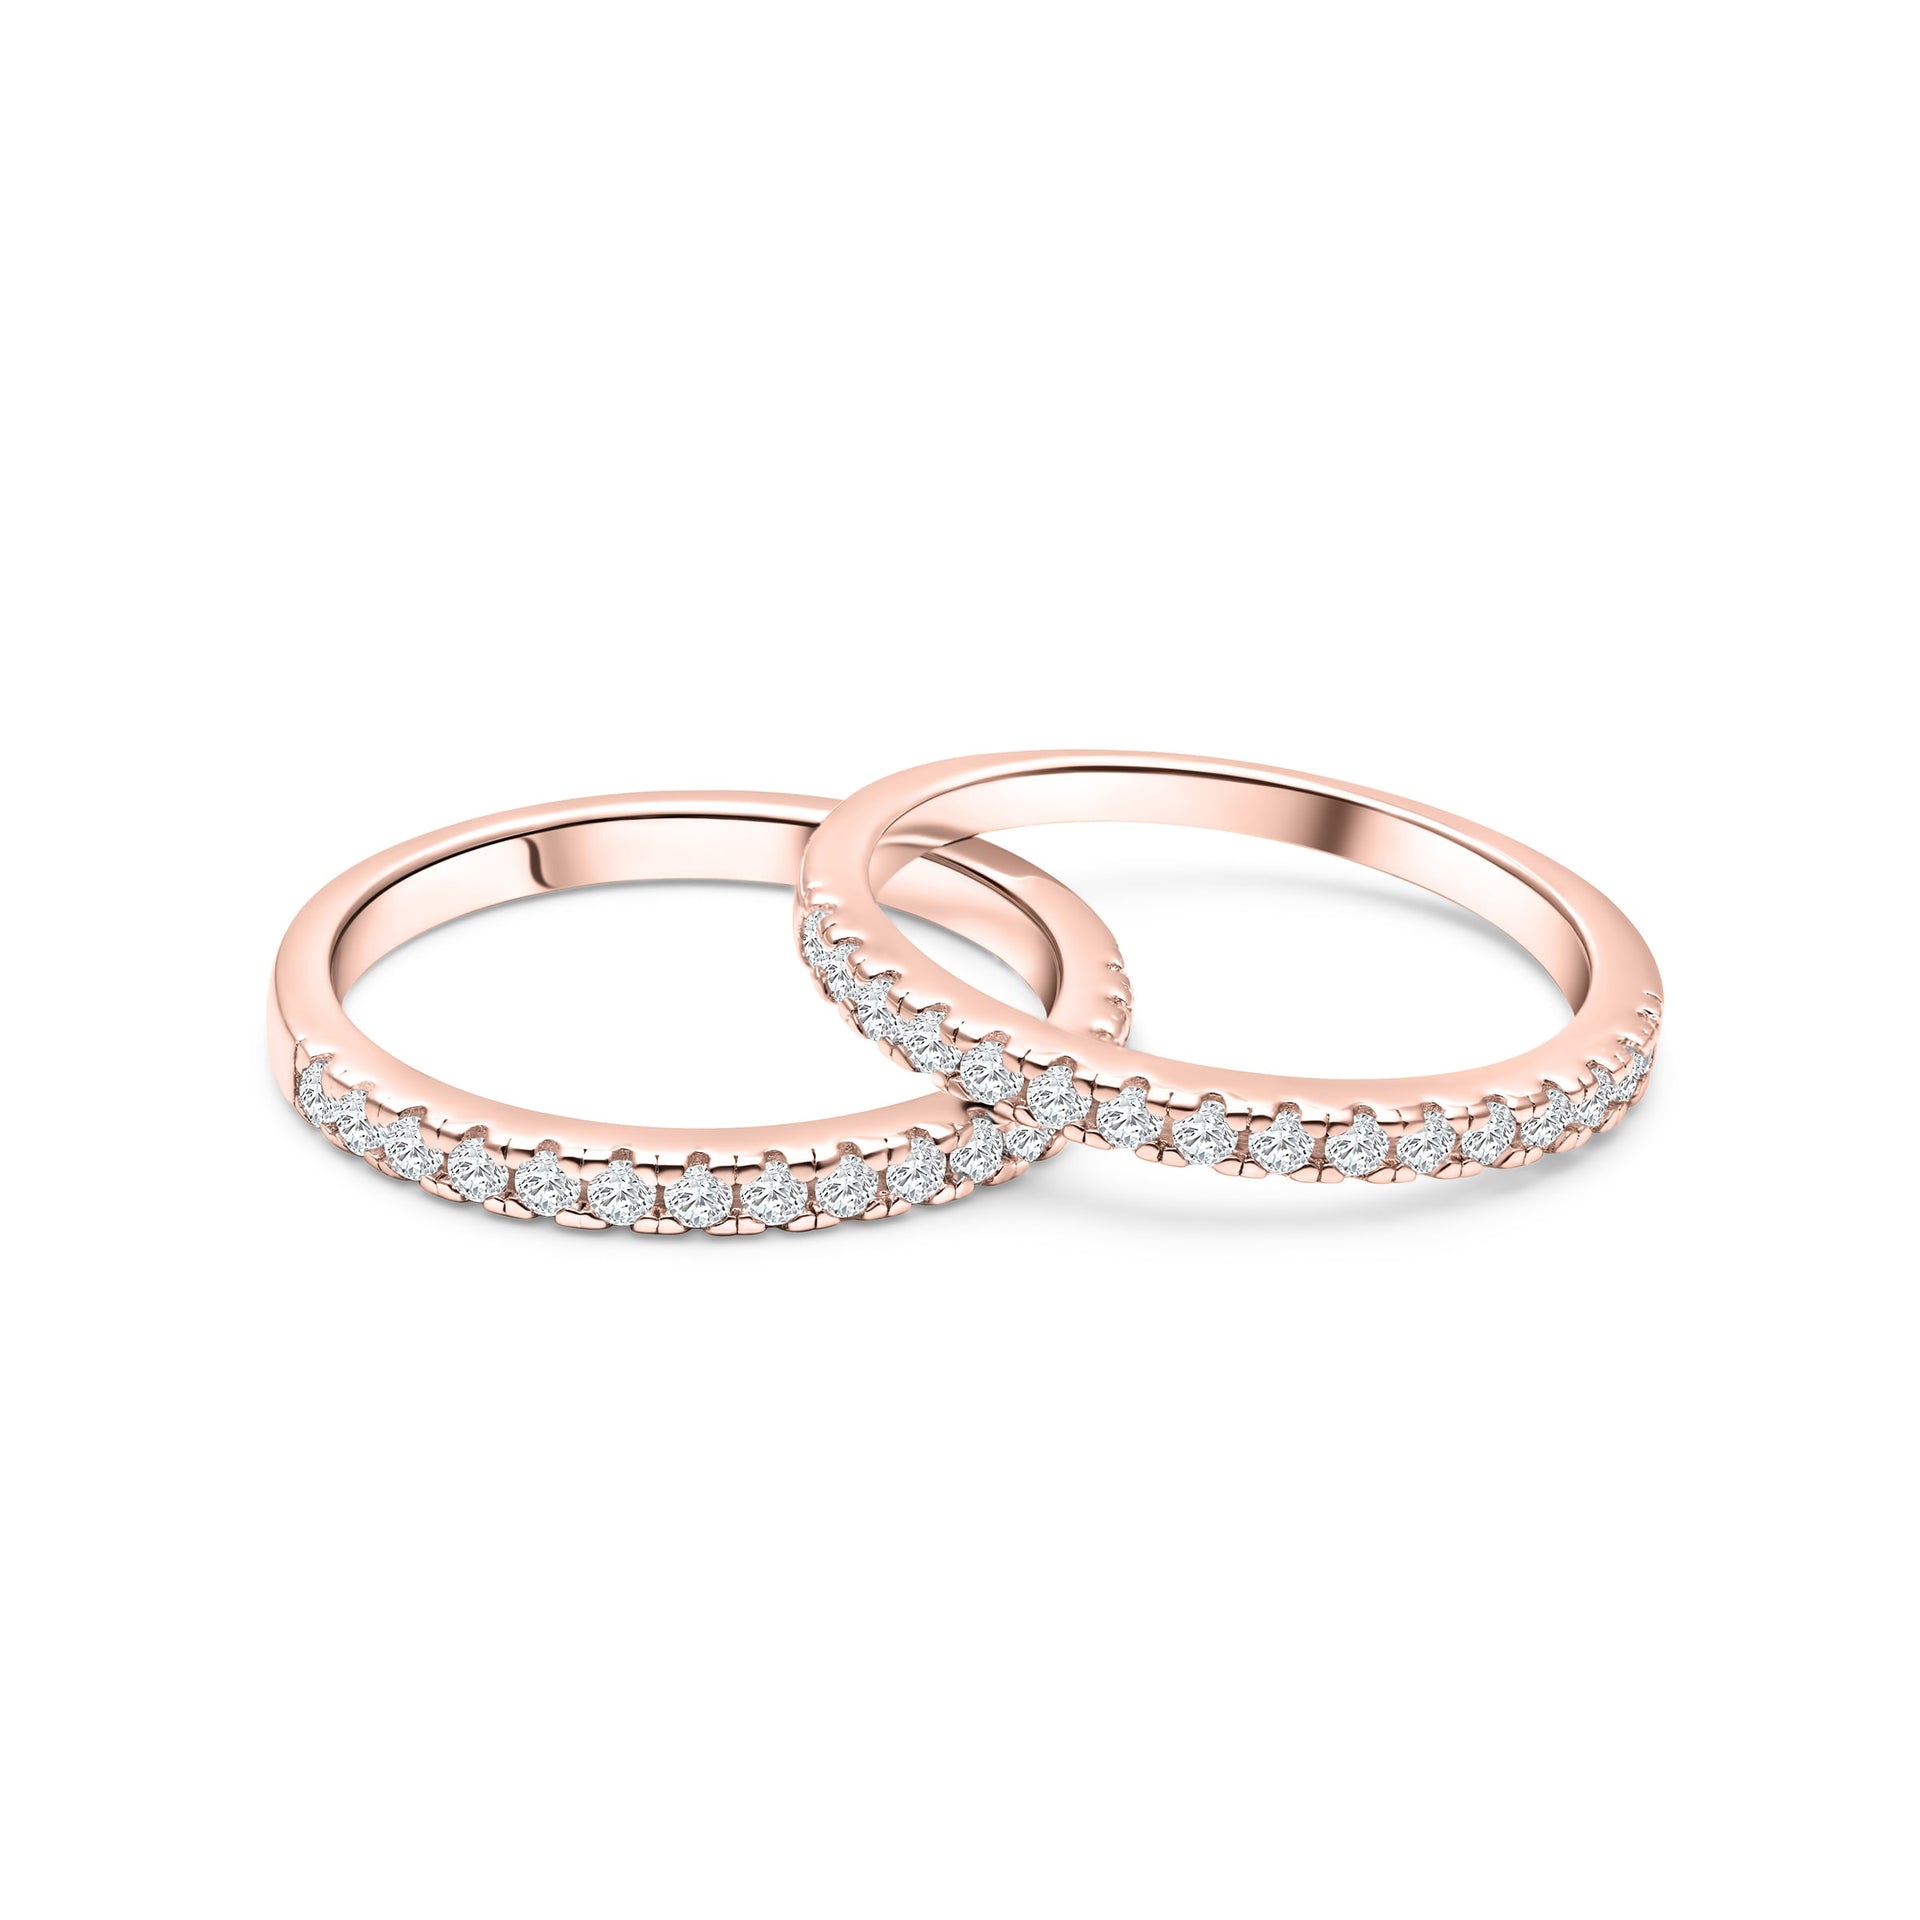 two gorgeous desire engagement rings shown in a rose gold duo stack